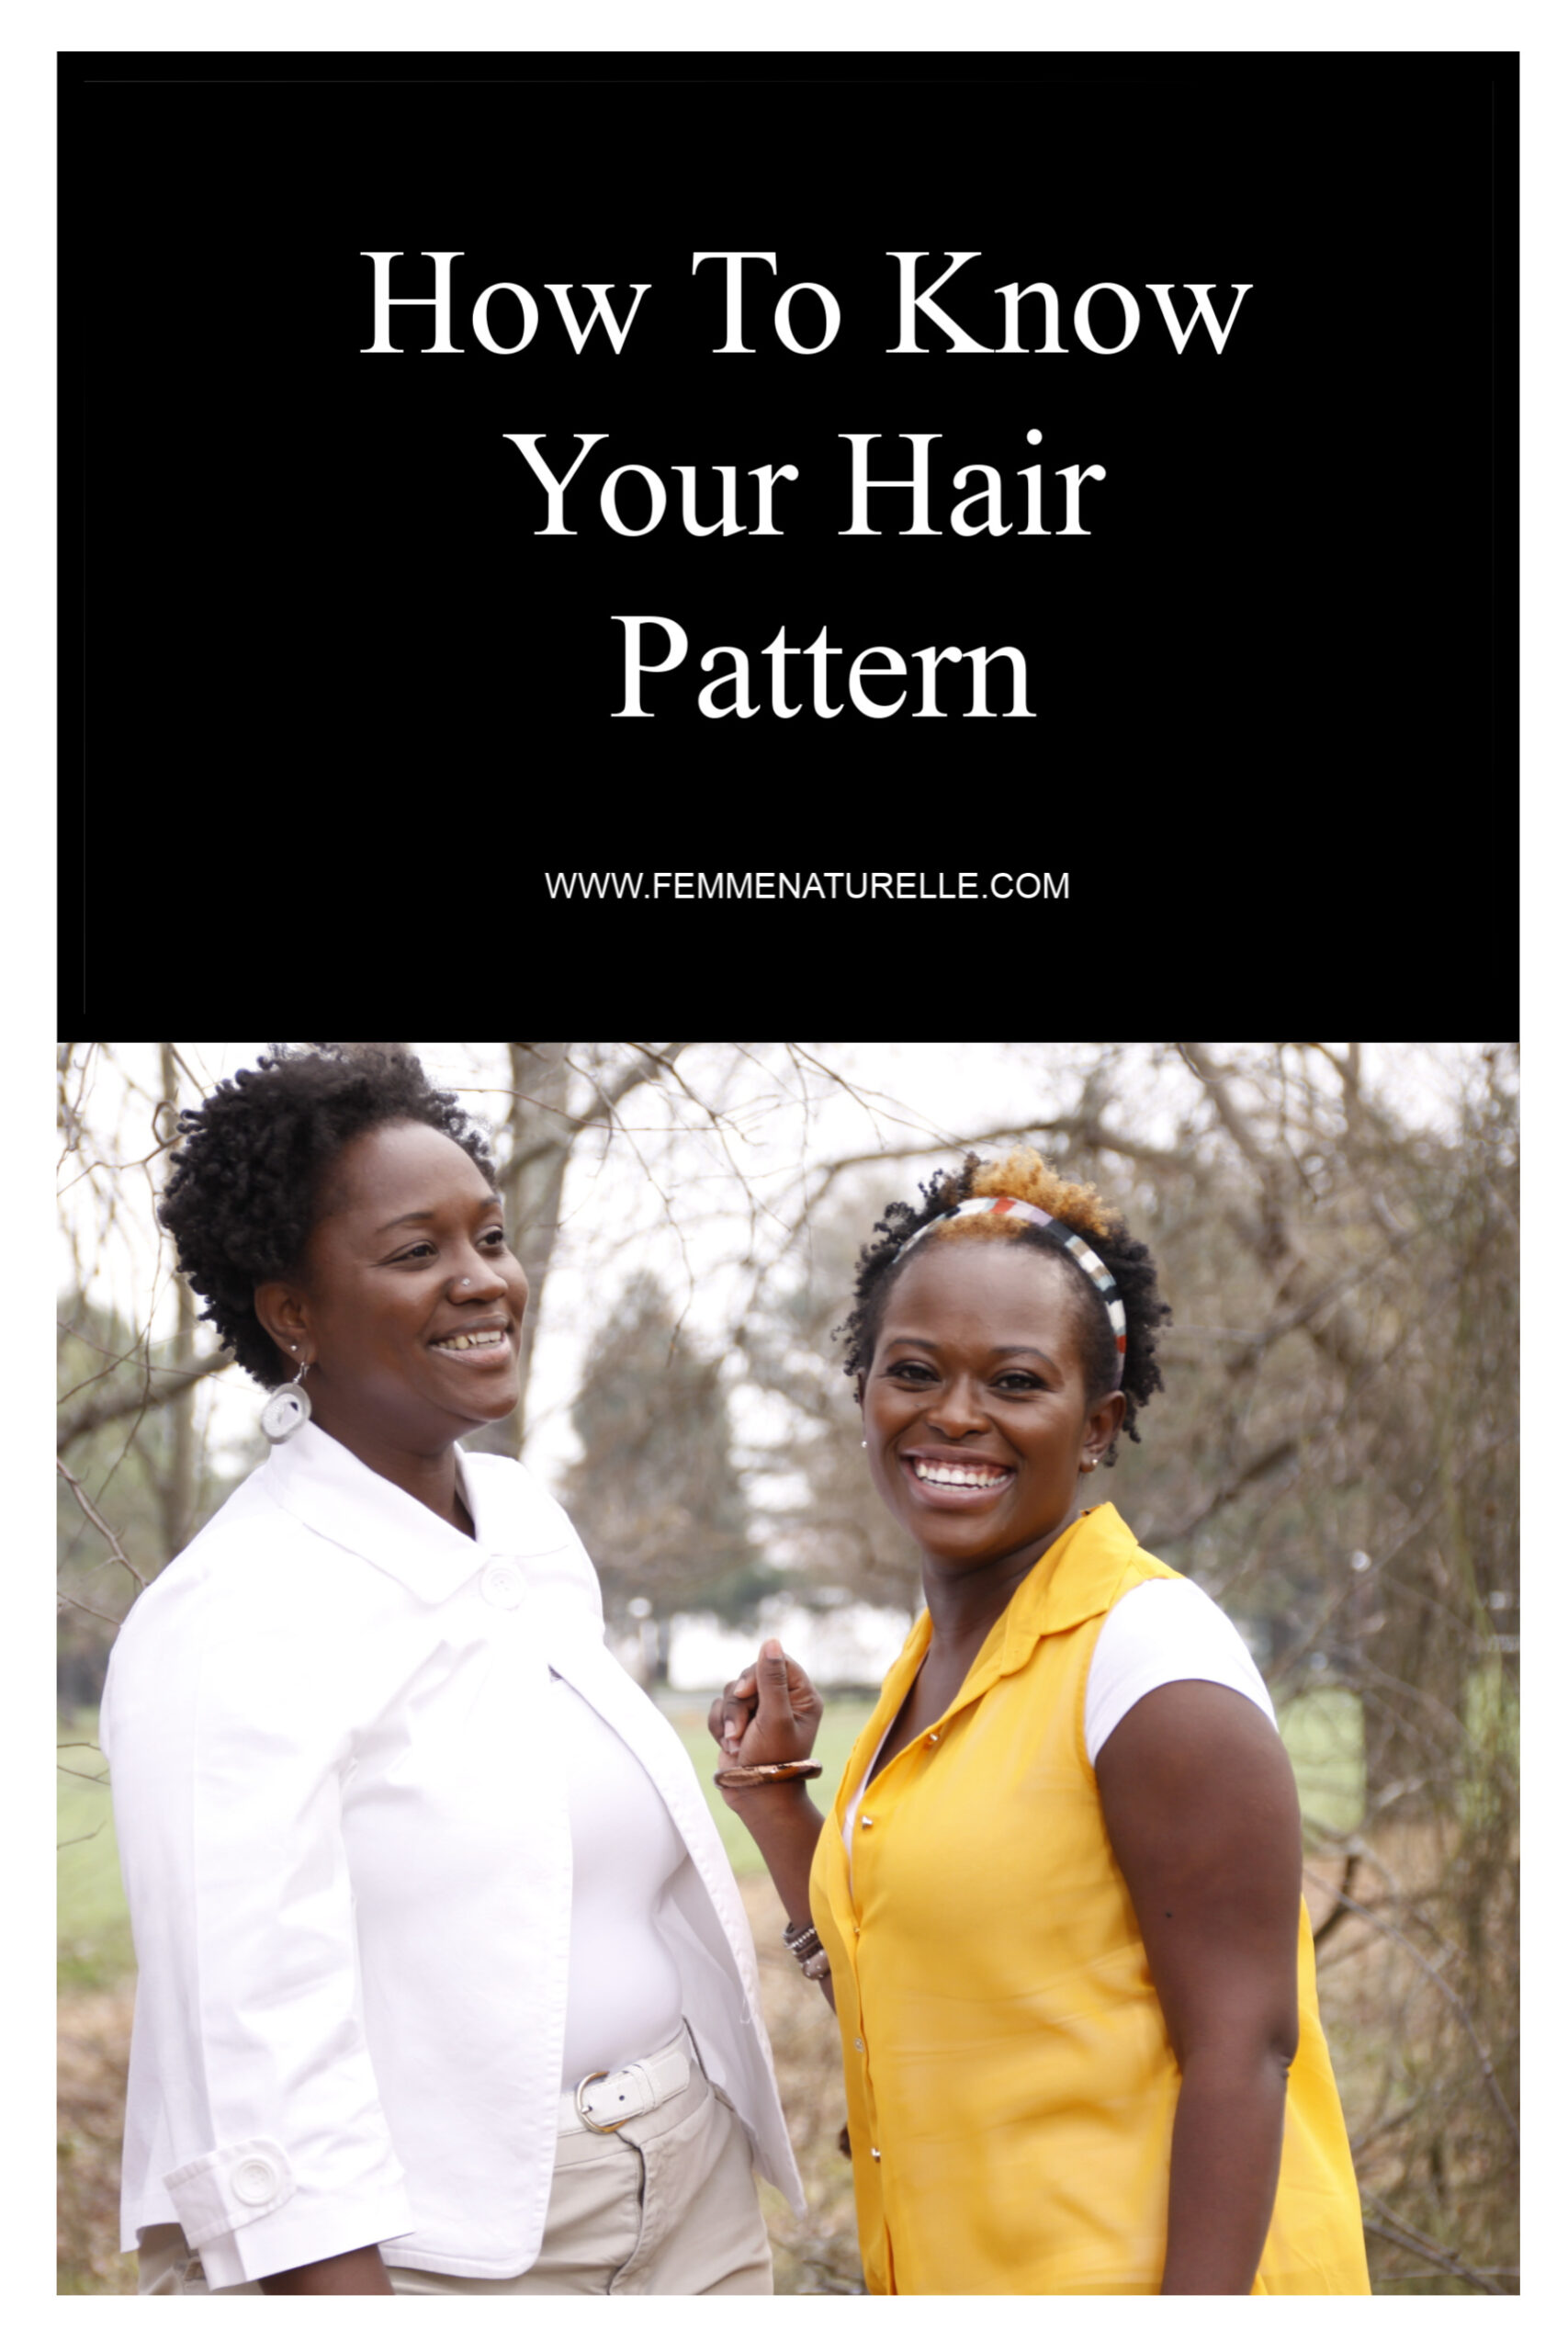 How To Know Your Hair Pattern